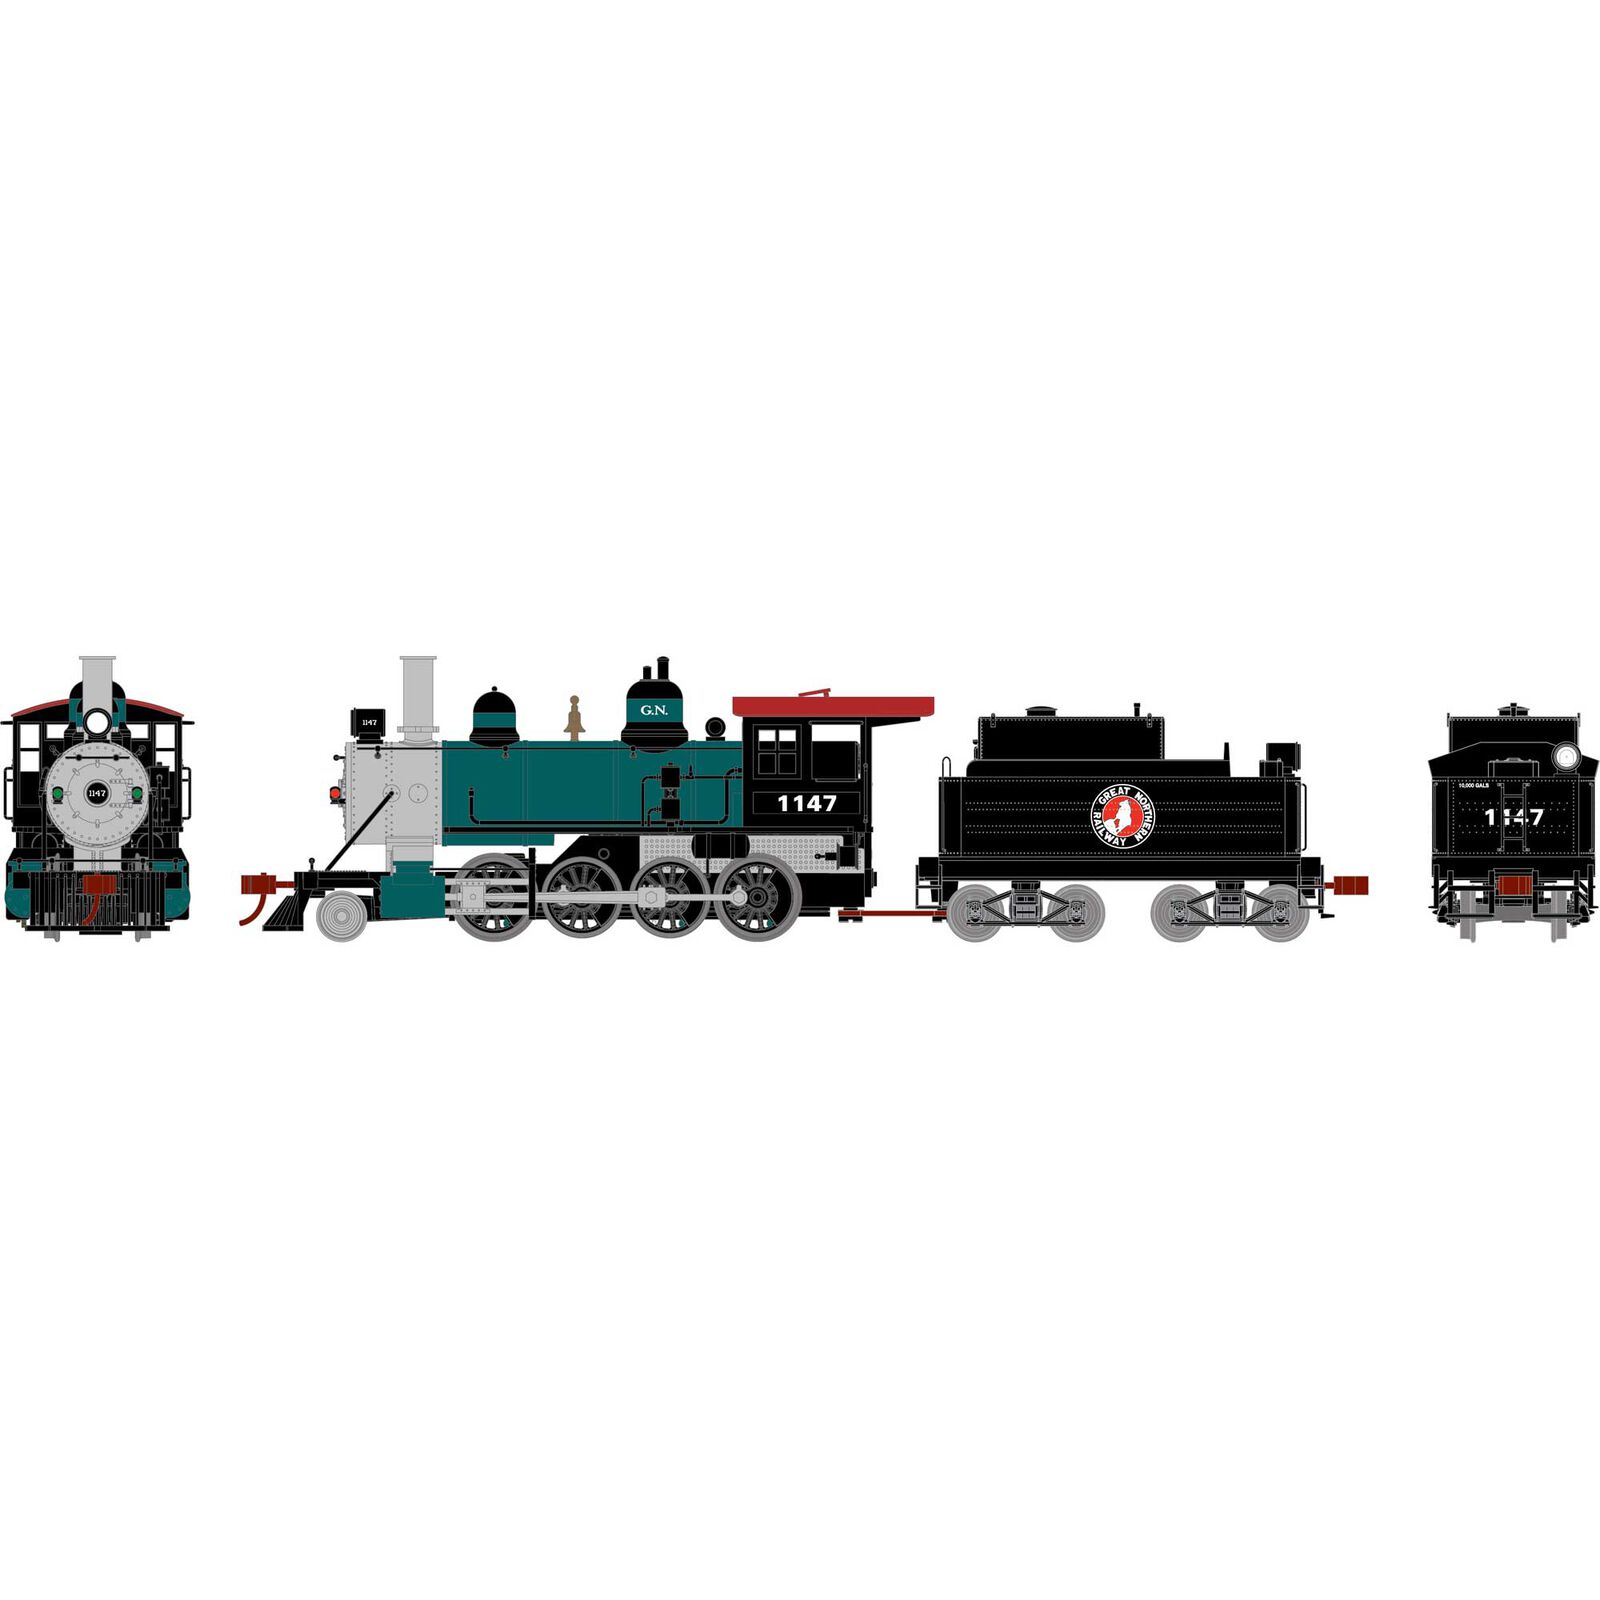 HO Old Time 2-8-0 Locomotive with DCC & Sound, GN #1147